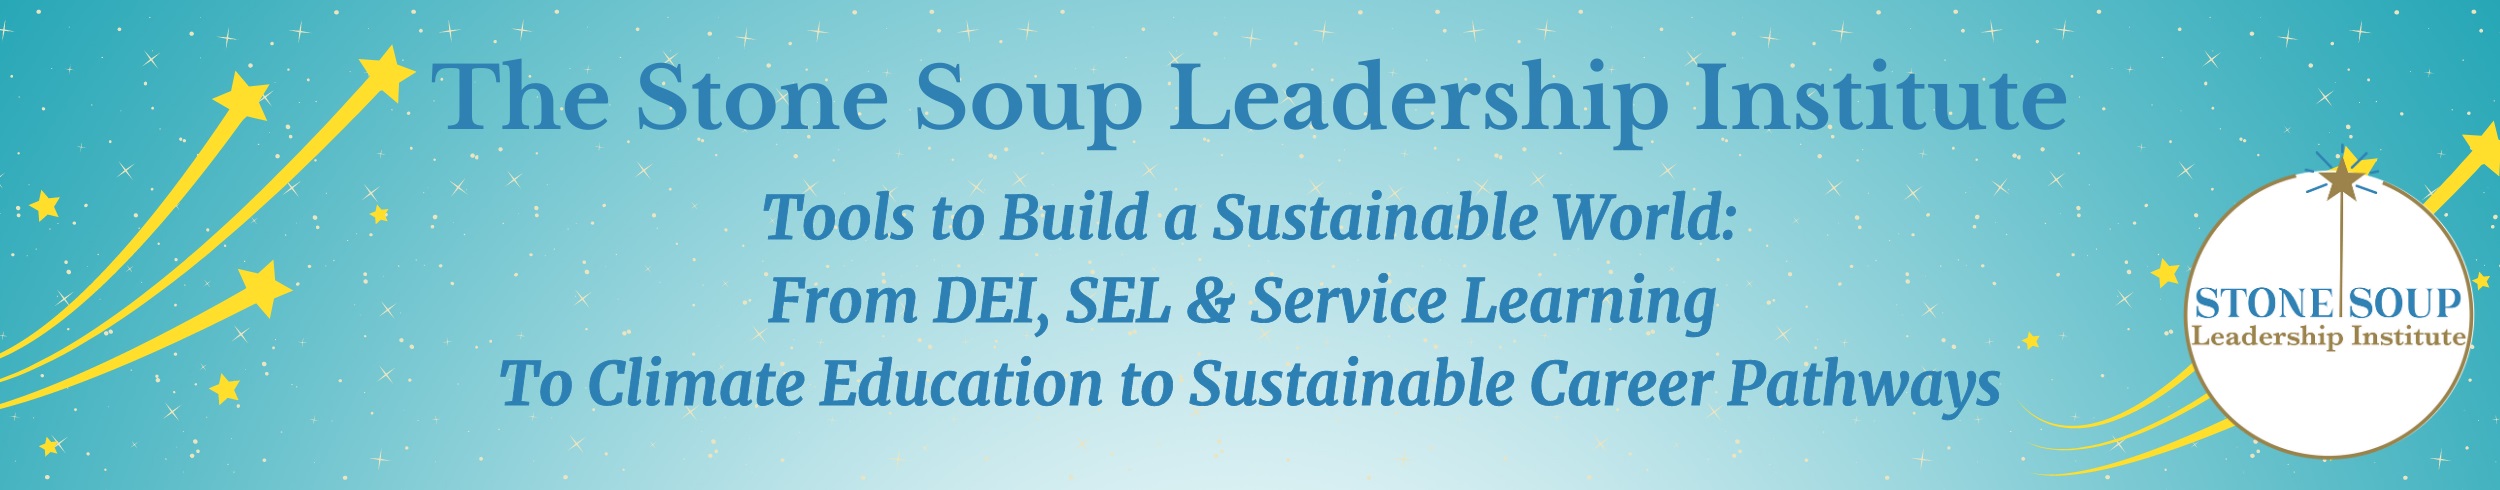 The Stone Soup Leadership Institute: Touchstone Leader's Platform